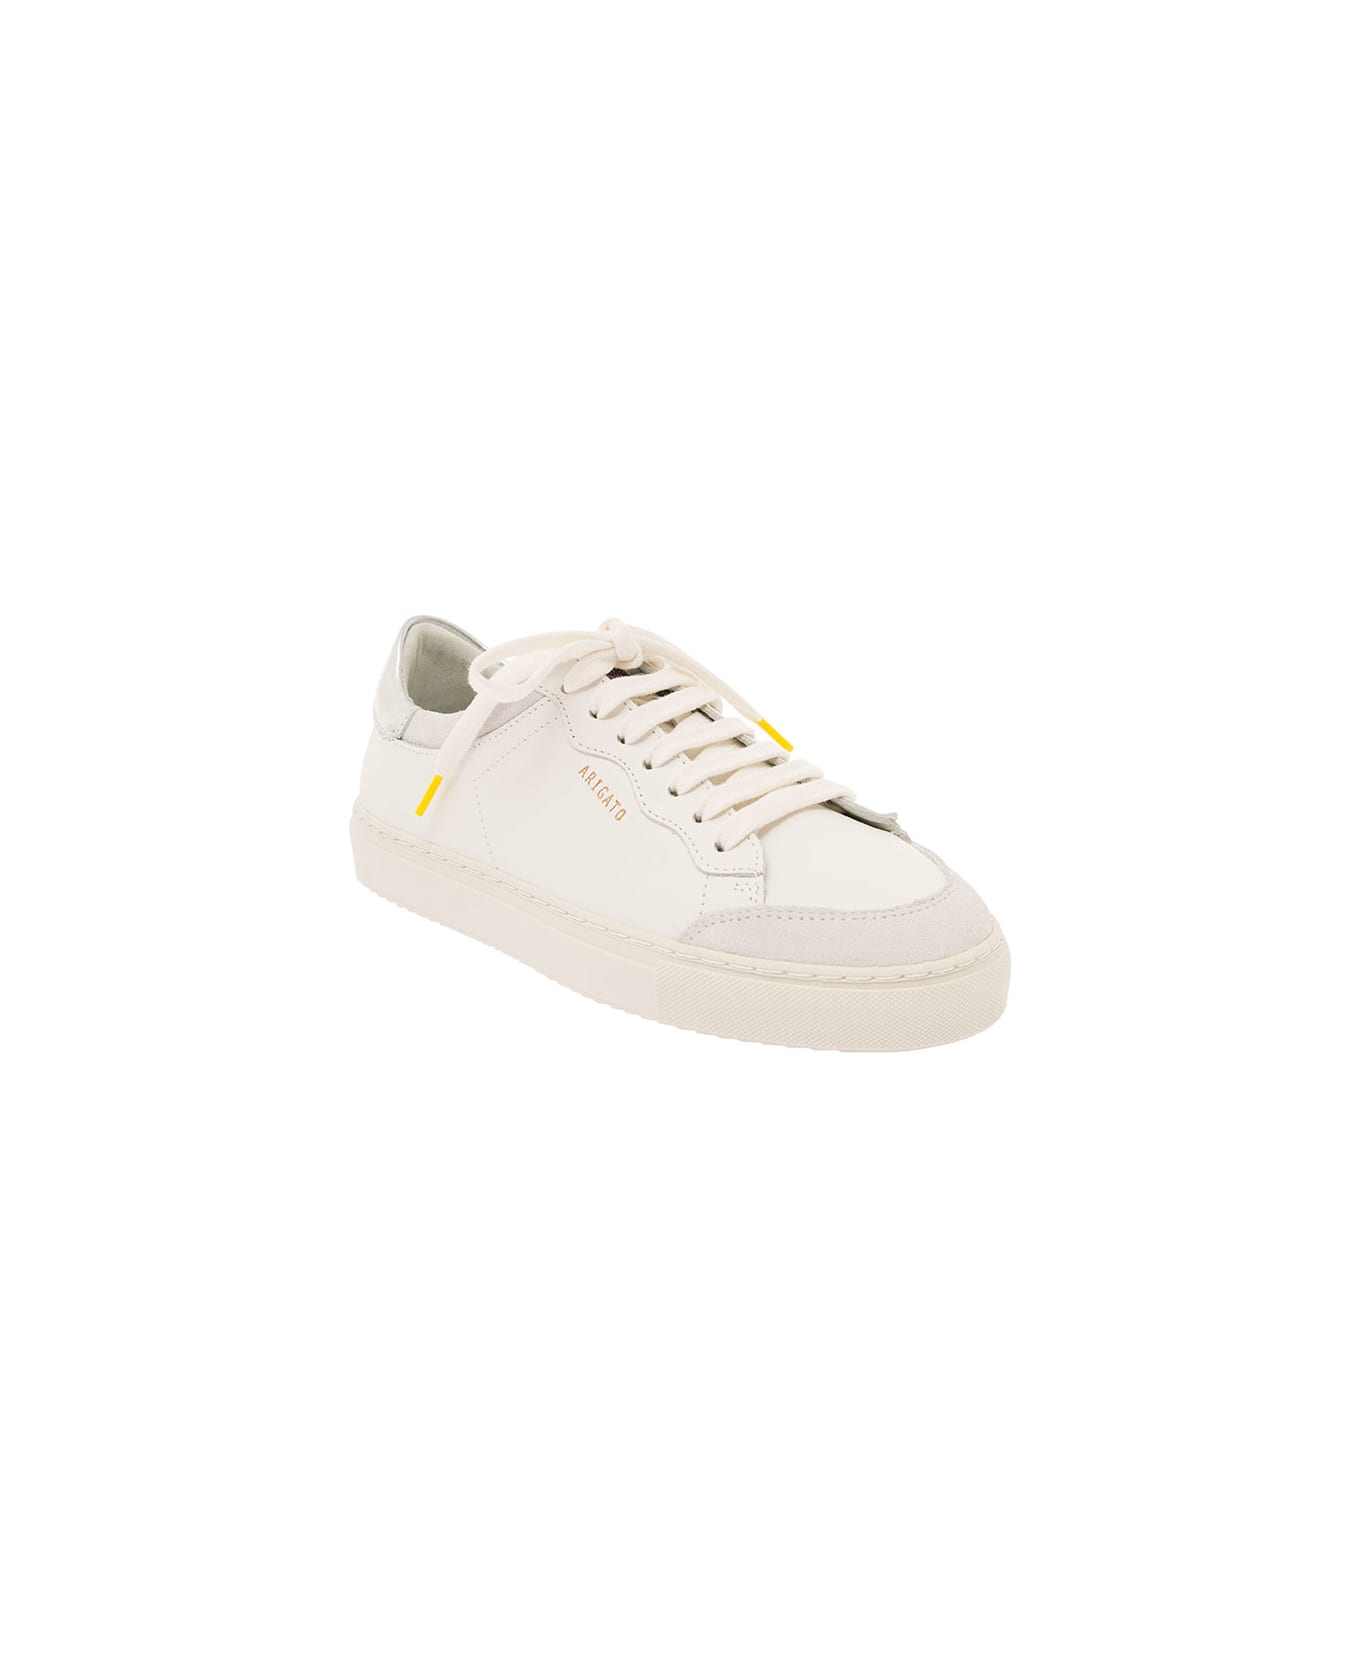 Axel Arigato White Low-top Sneakers Wit Metallic Heel Tab In Smooth Leather Woman - White スニーカー